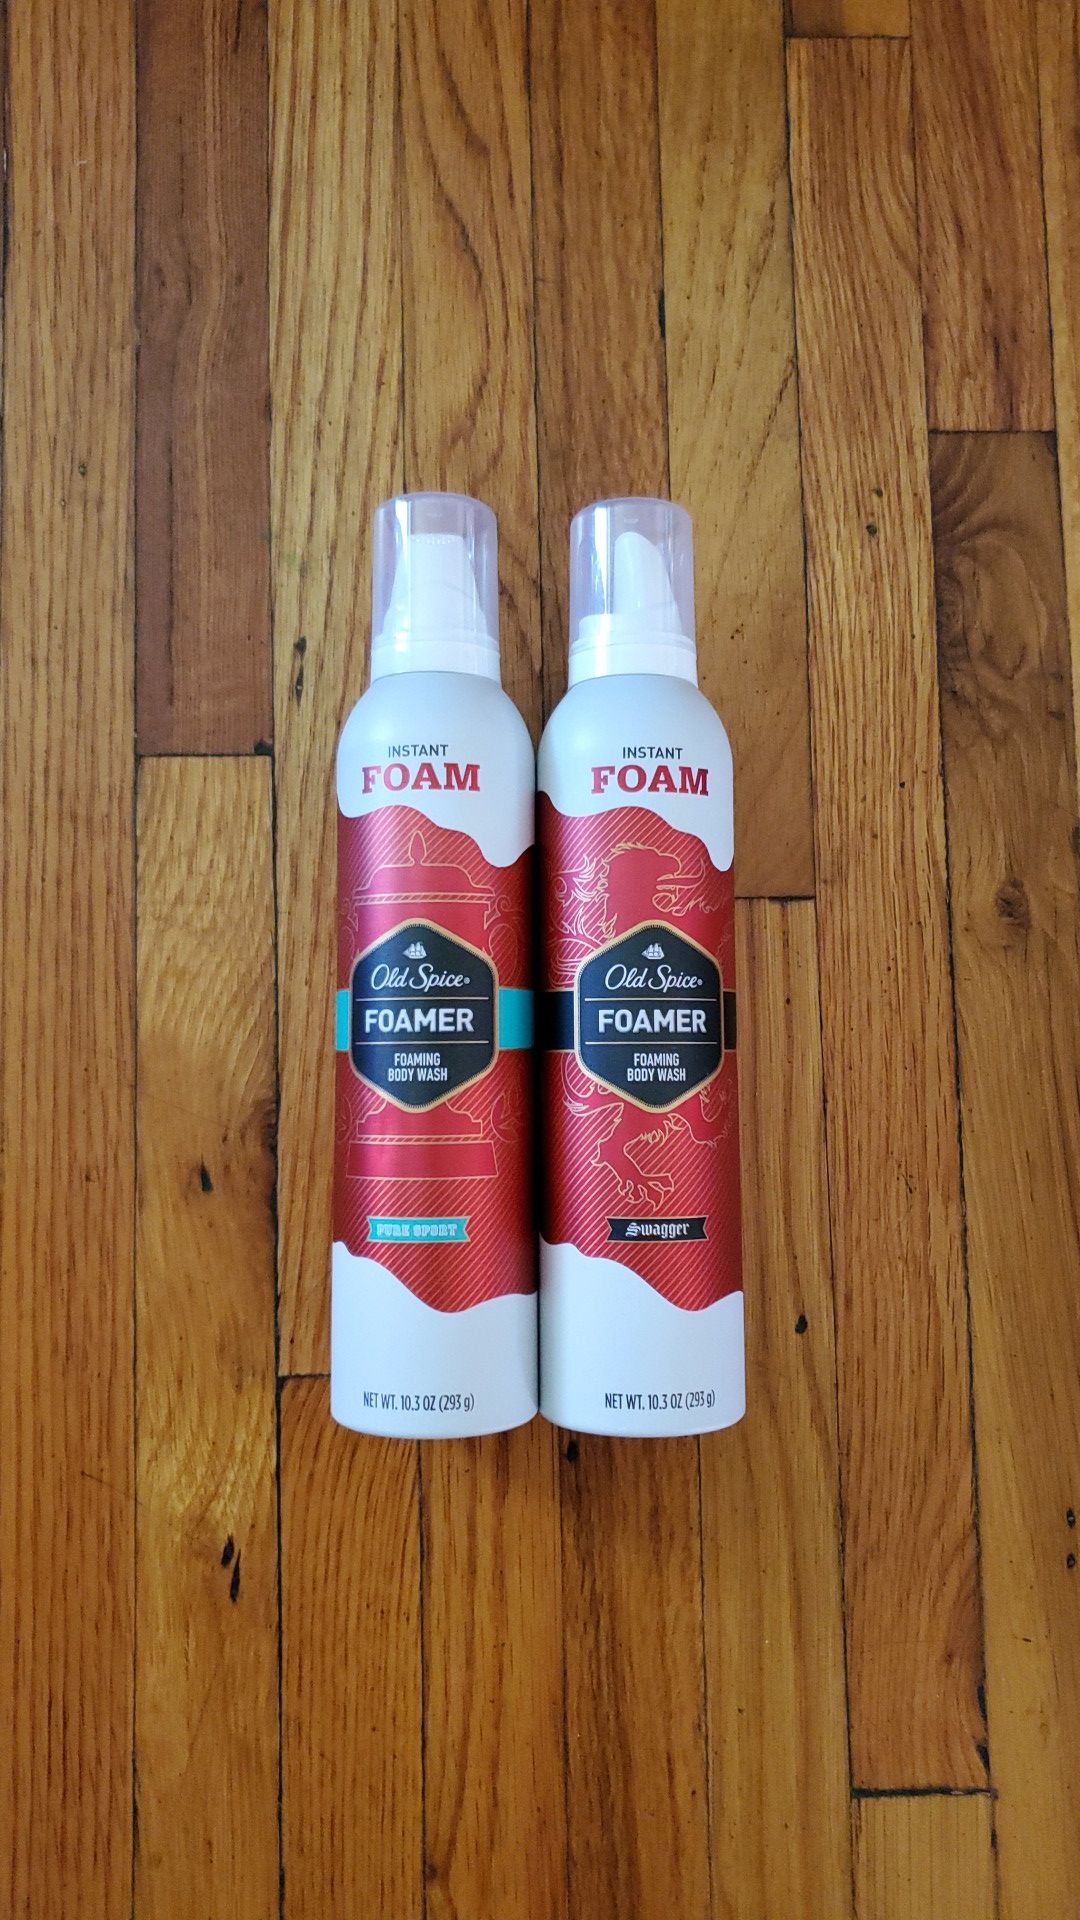 Old Spice Foam 5 swagger/9 pure sport scent $2 each